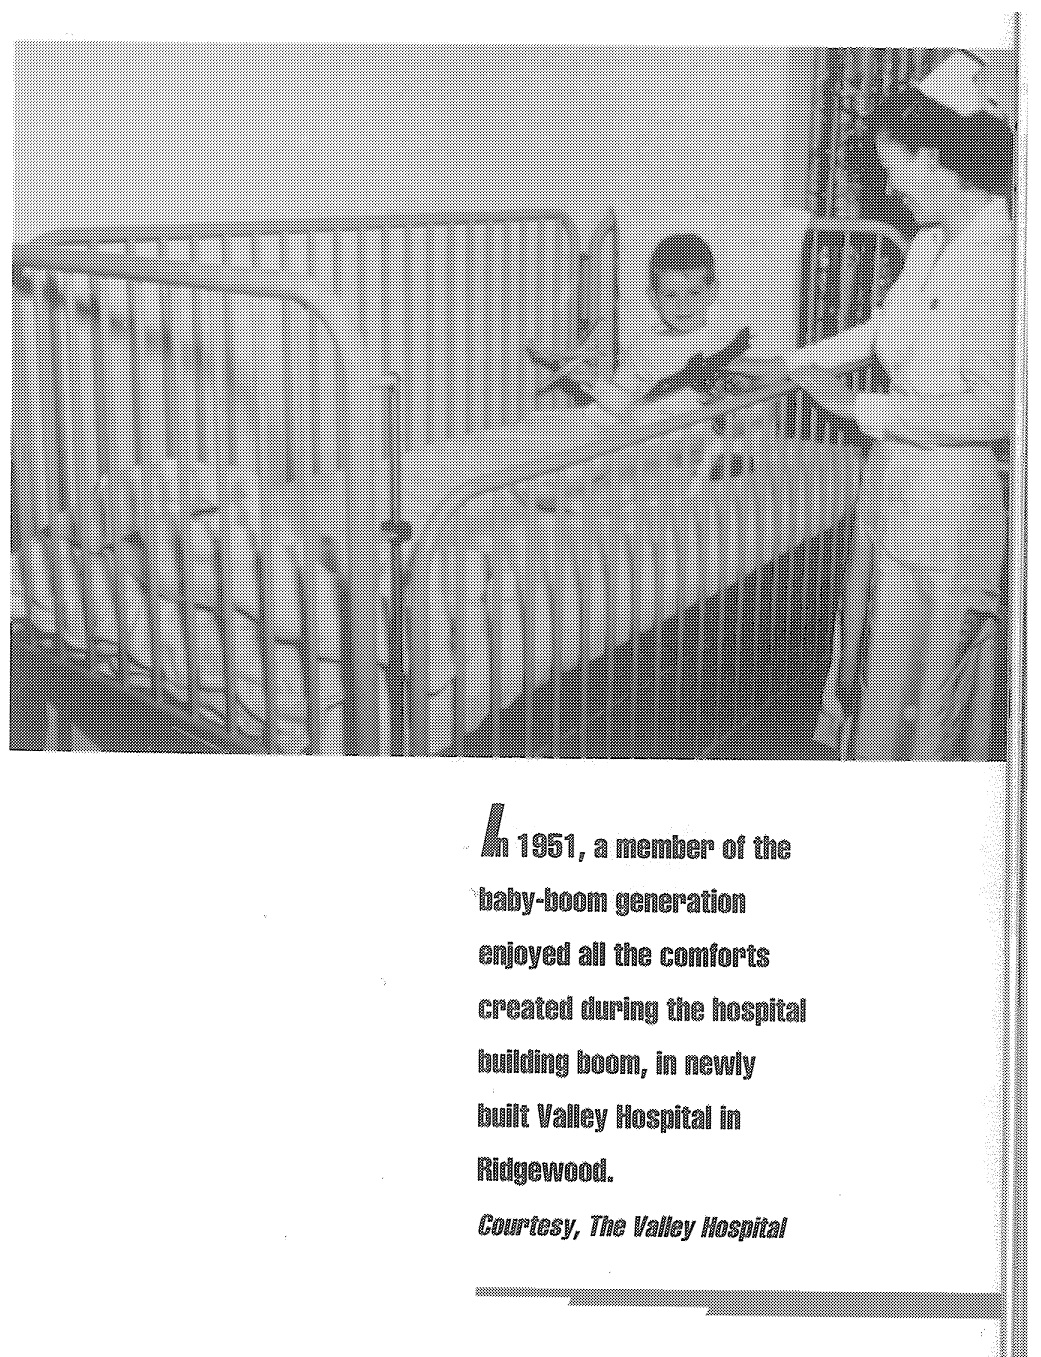 Post-war prosperity meant growing families as well as growing hospitals. In 1951, when this photo of a child at The Valley Hospital was taken, New Jersey saw 105,218 births, an increase of 7,484 babies from the prior year and an increase of 38,114 from 1941.